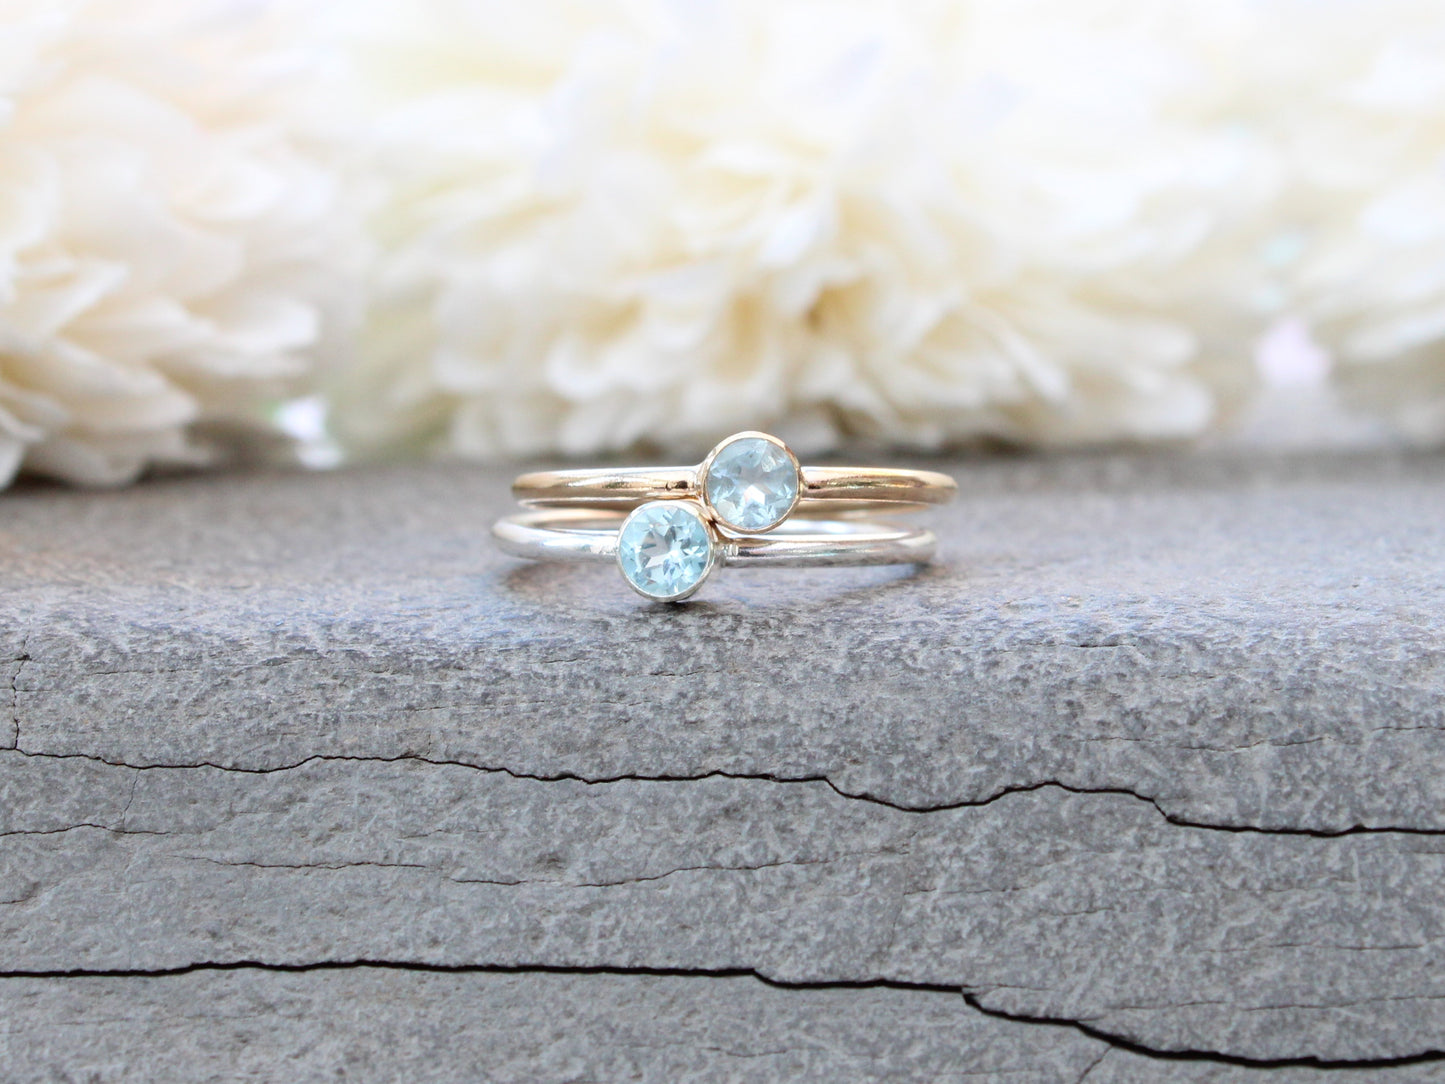 Aquamarine ring in silver or gold. March birthstone ring.